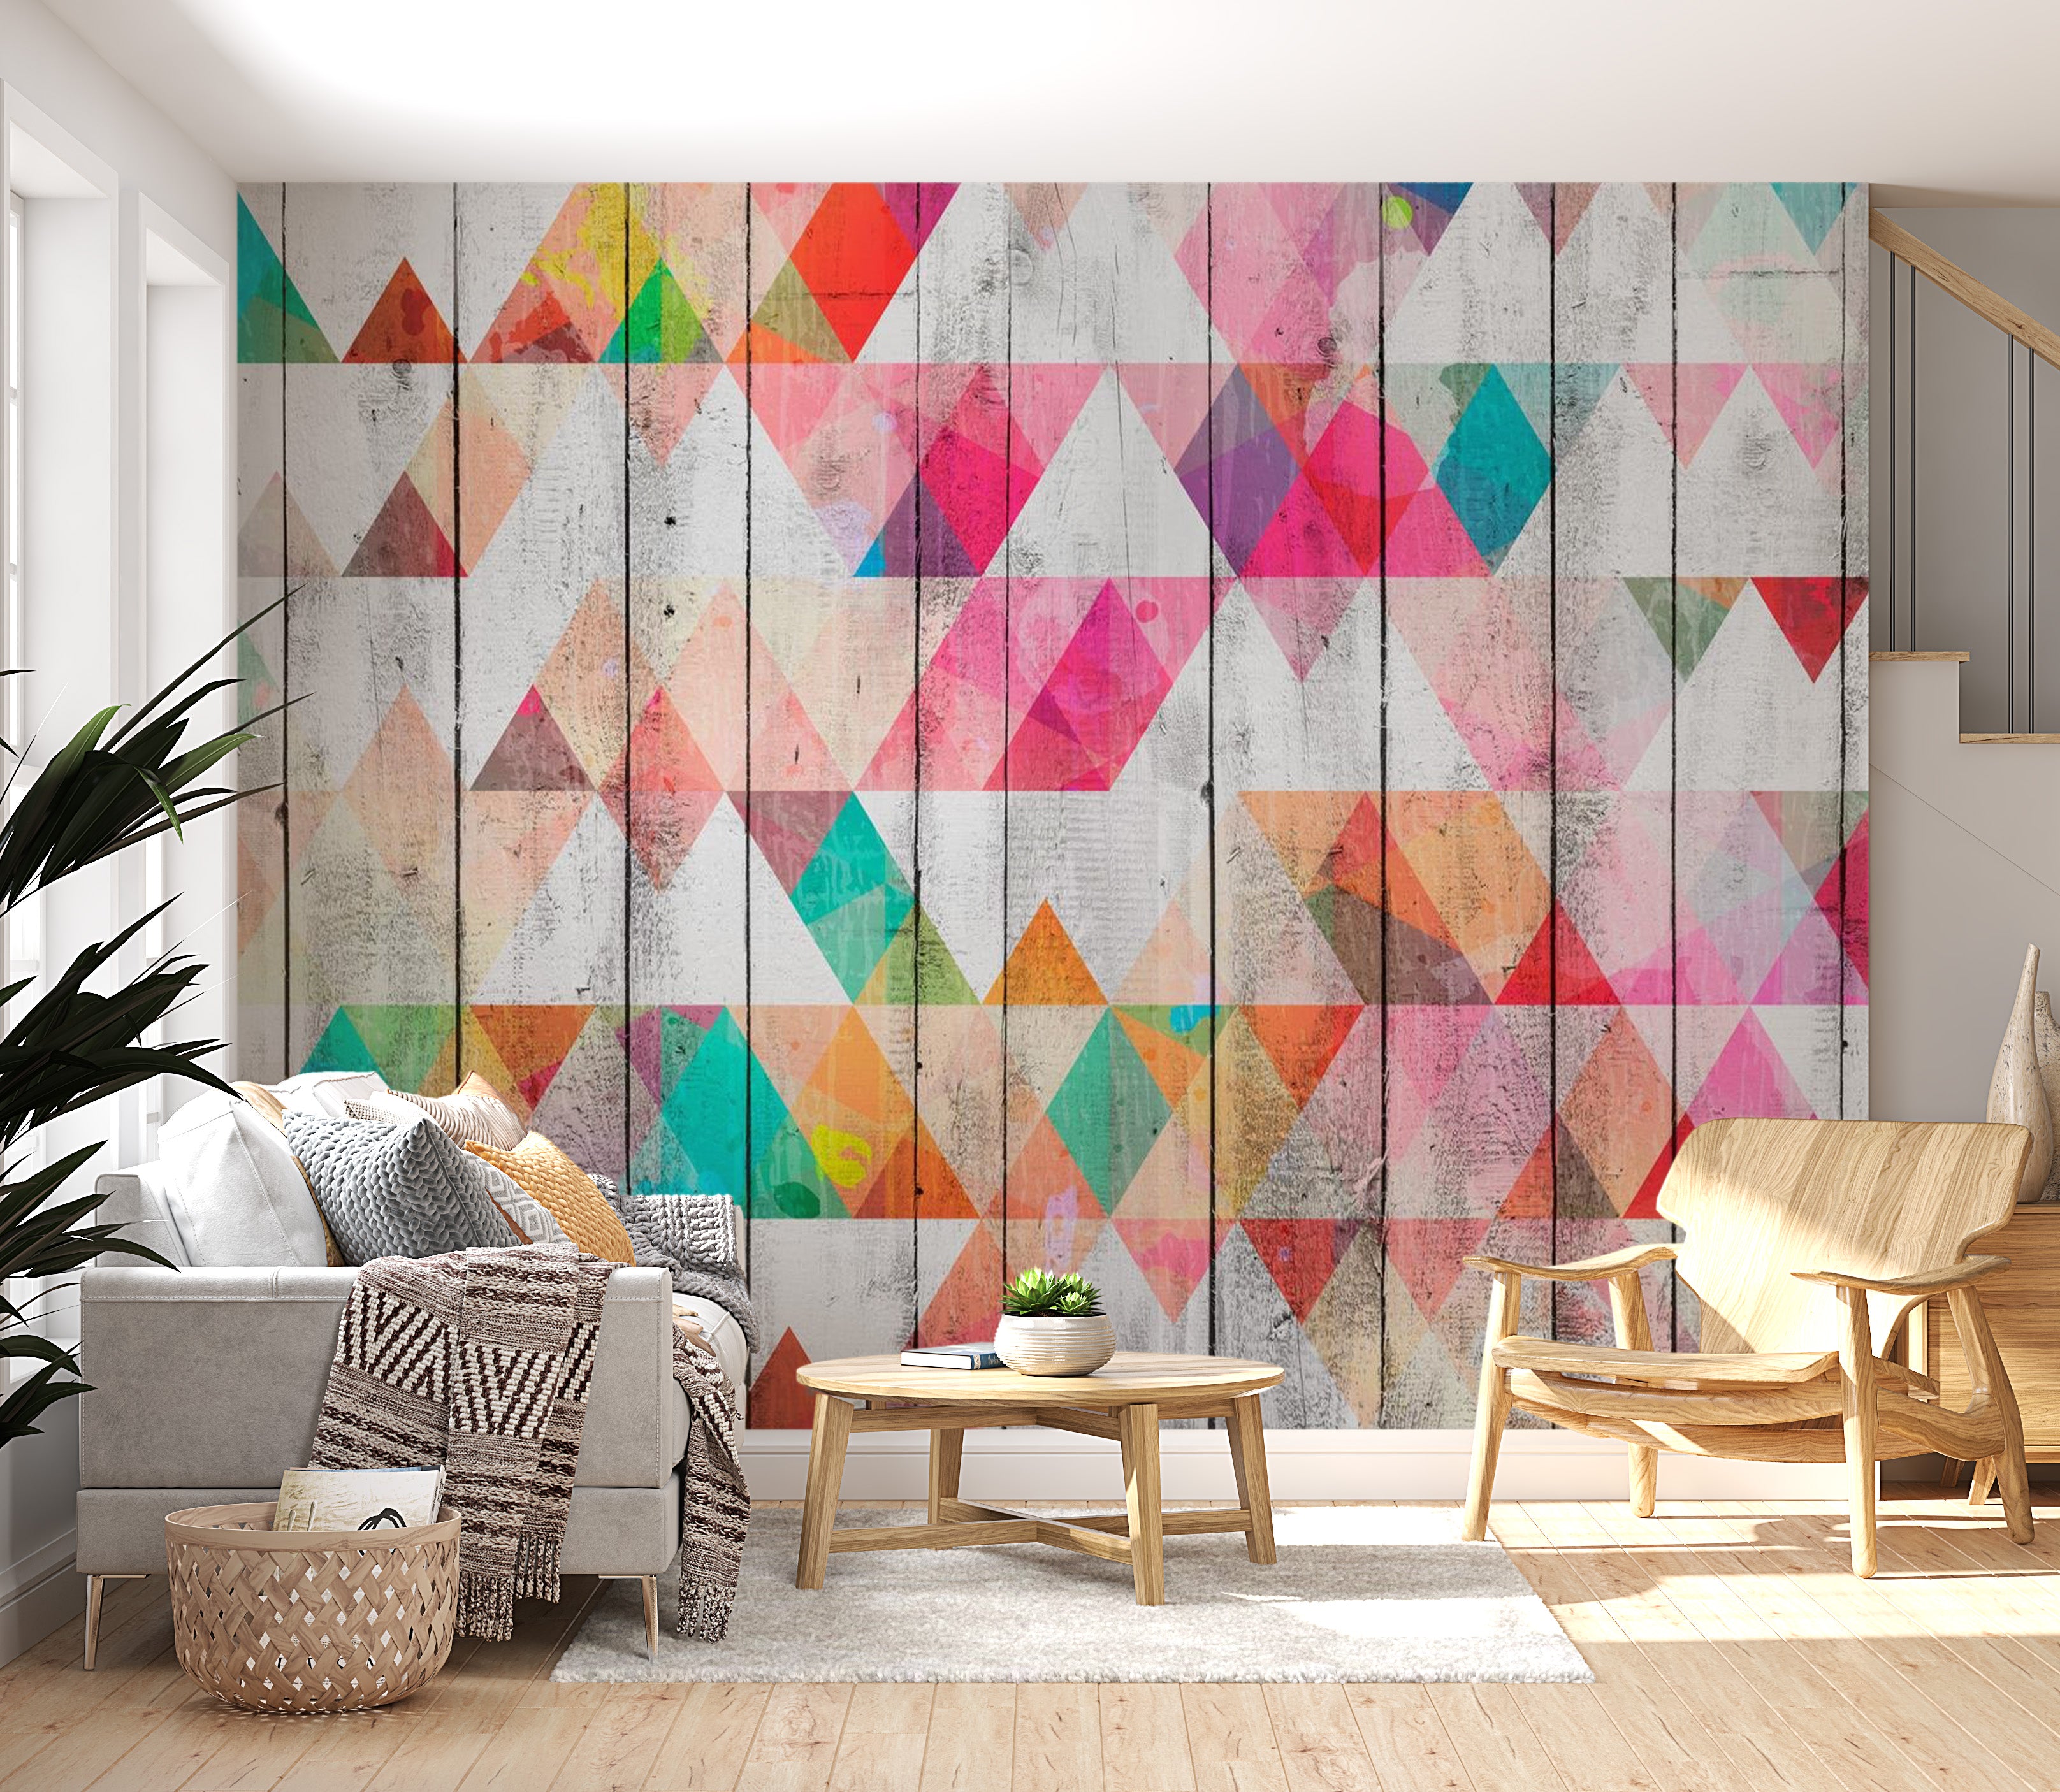 Surface Texture Wallpaper Wall Mural - Rainbow Triangles on Wood